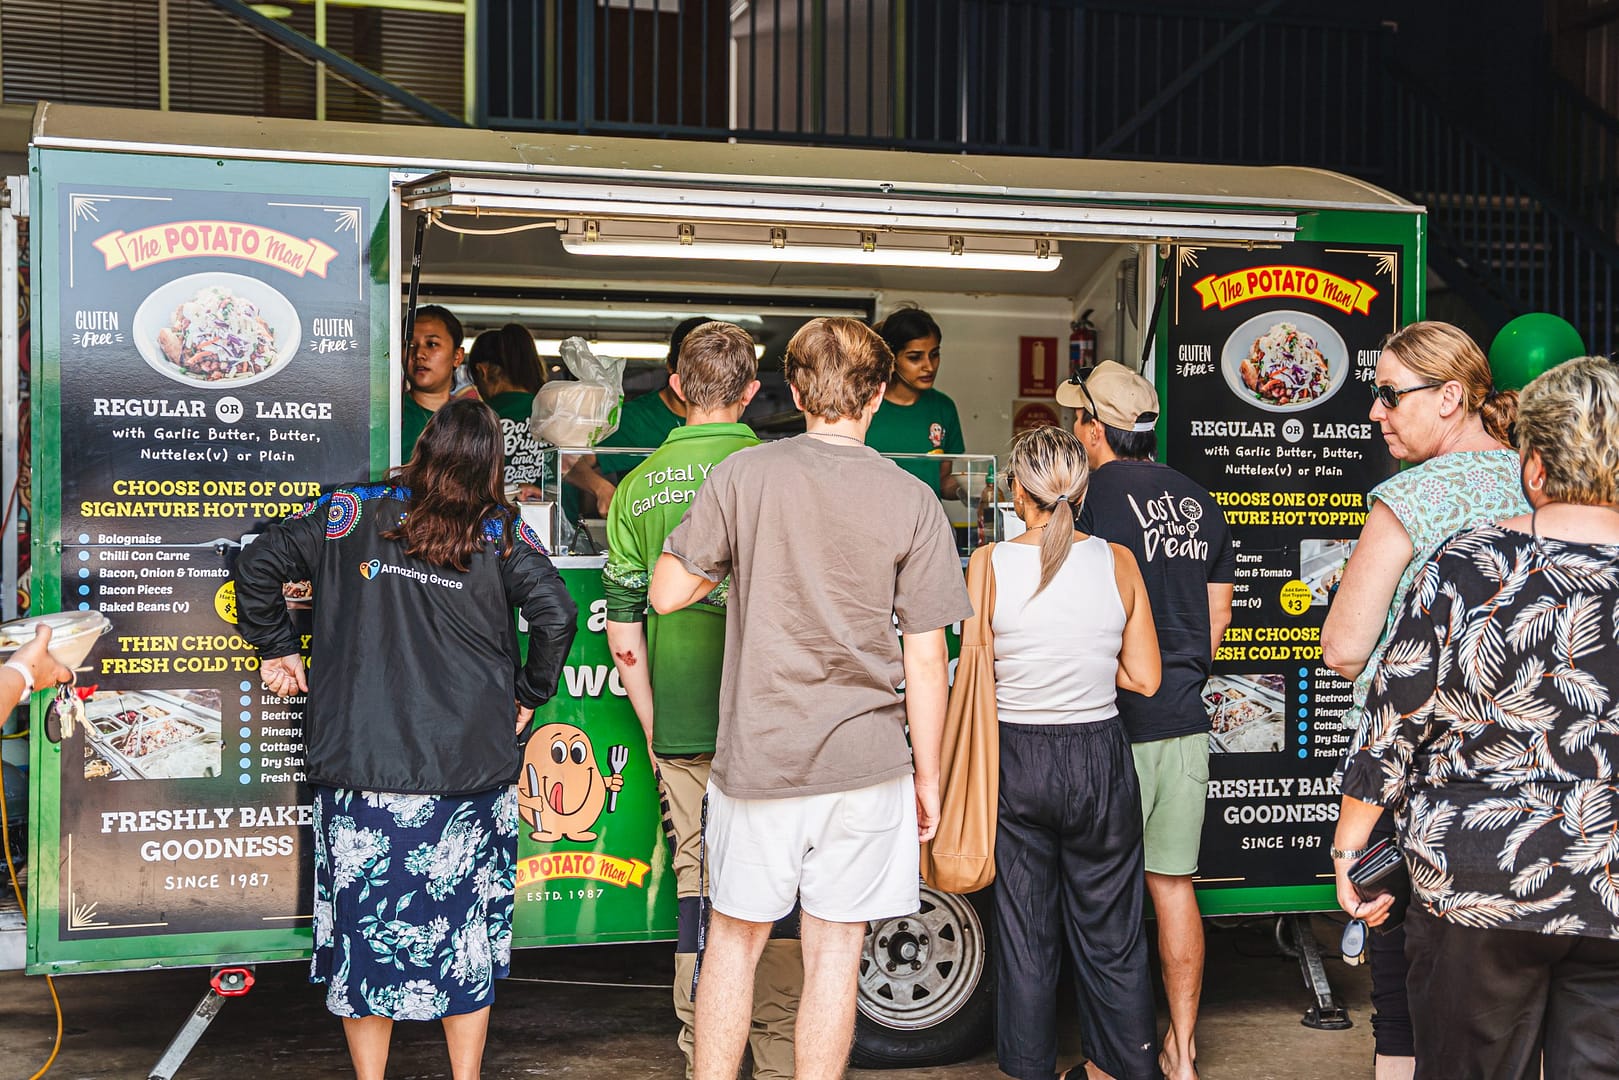 Bringing the iconic food truck experience to the heart of Winnellie